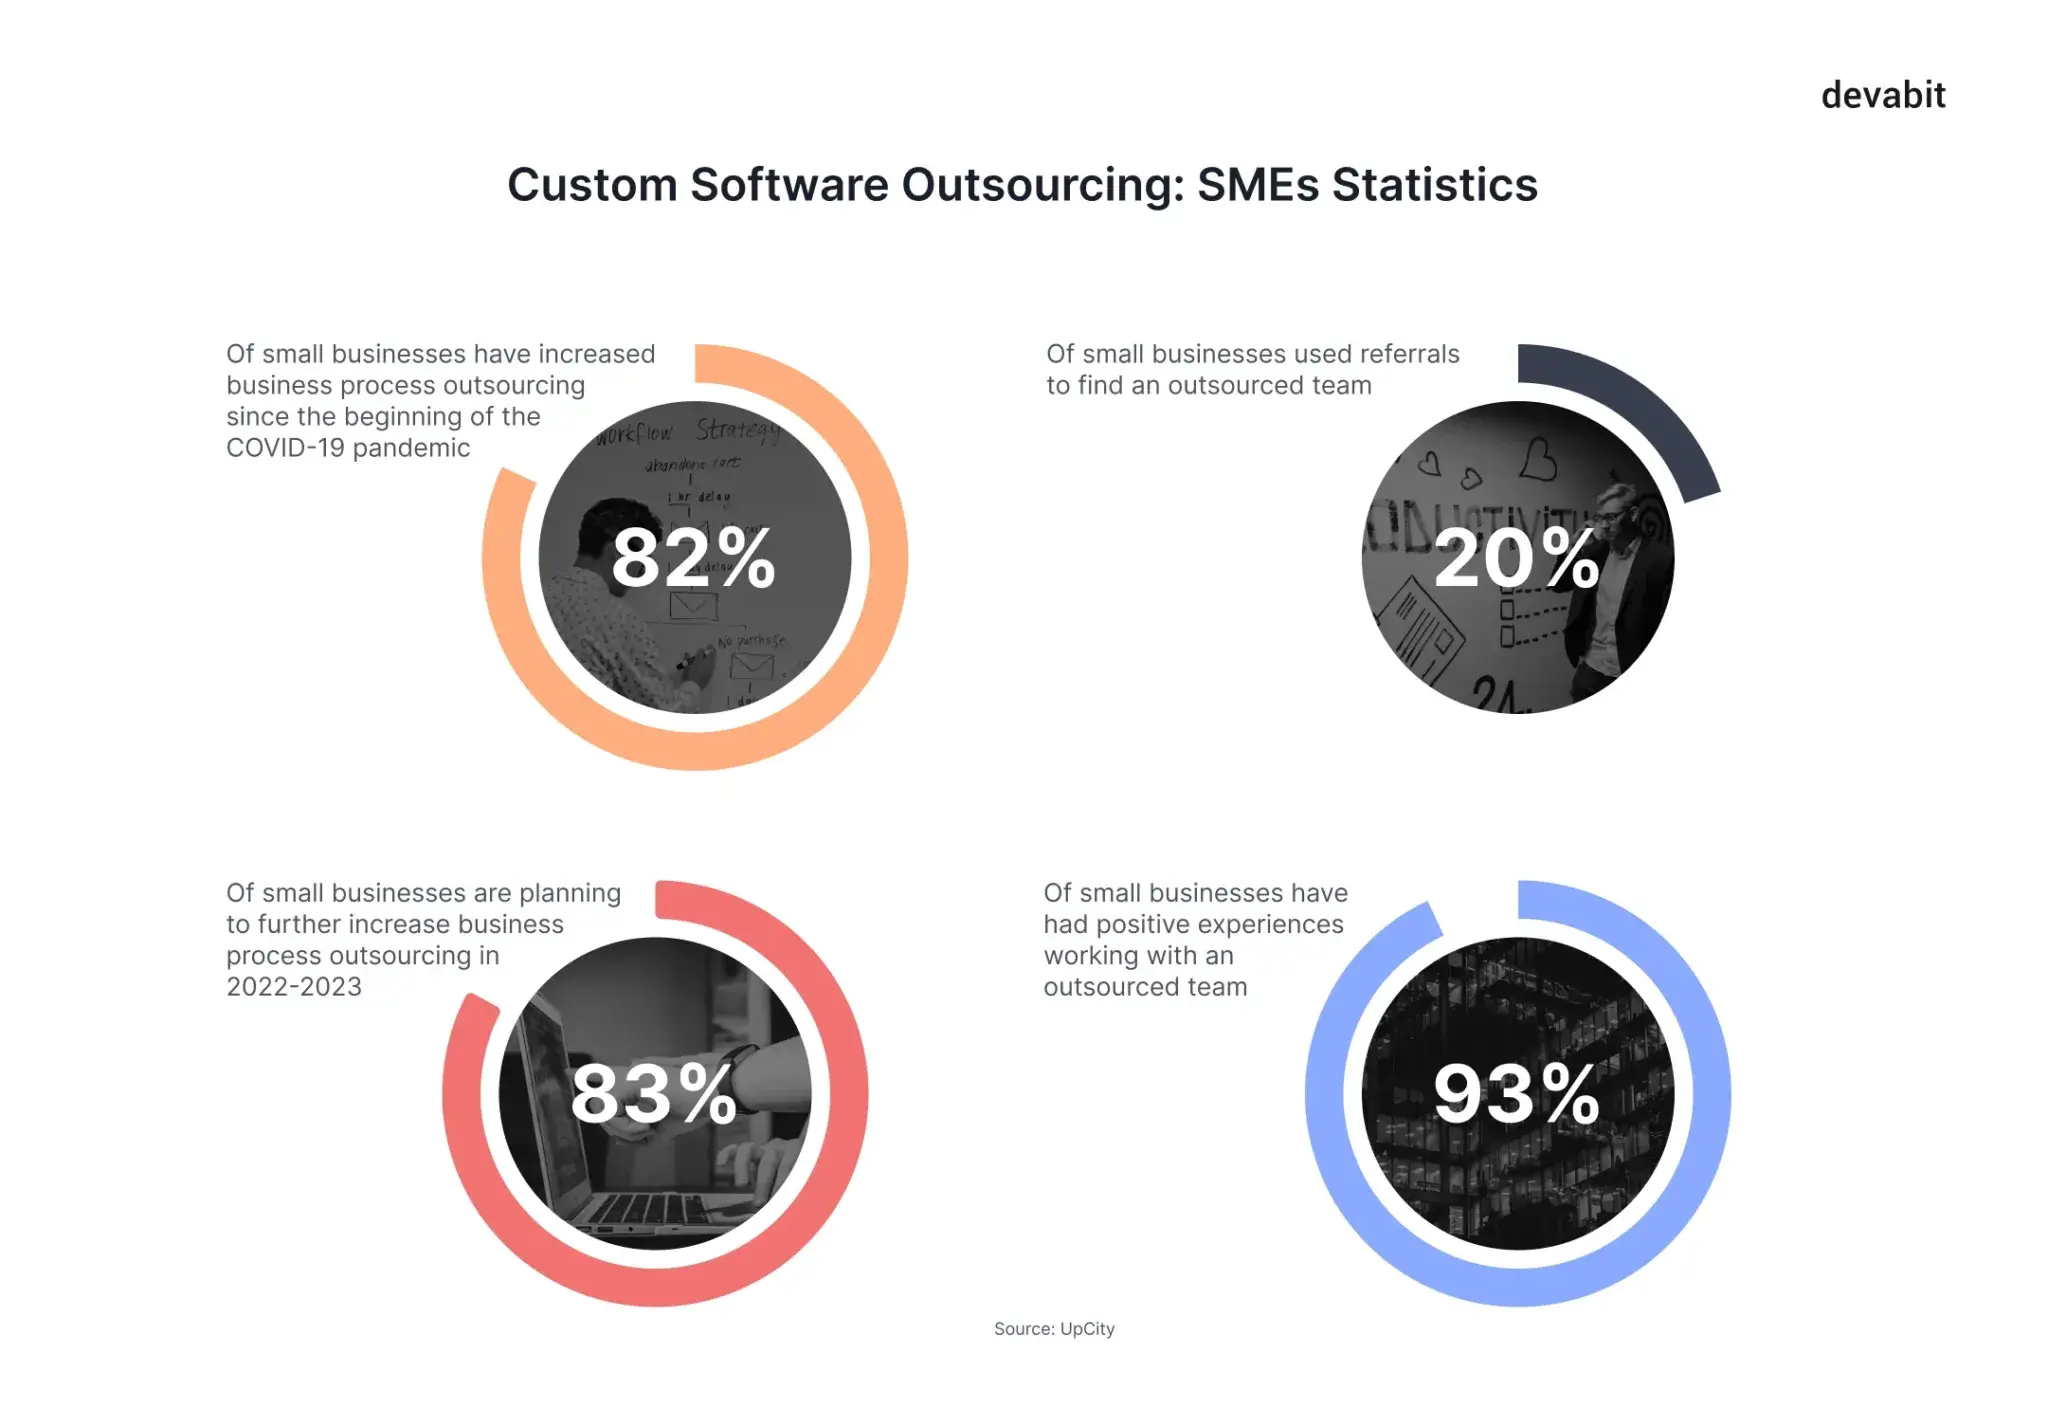 Custom Software Outsourcing: SMEs Statistics by devabit